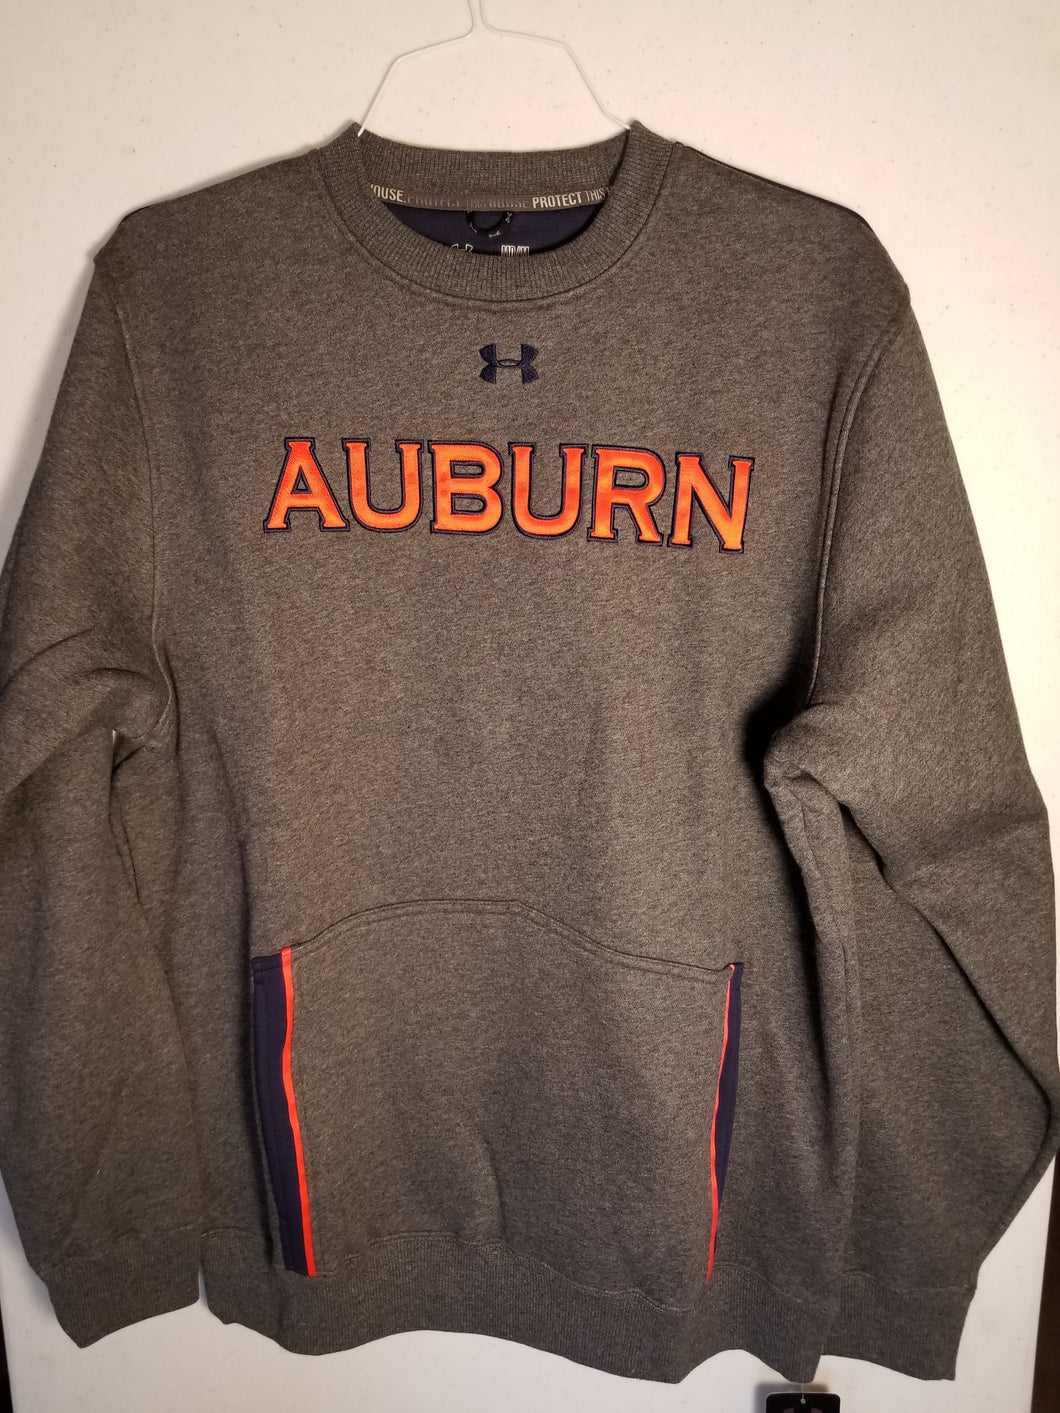 Auburn Charcoal Pullover Sweatshirt with Large Navy Insert